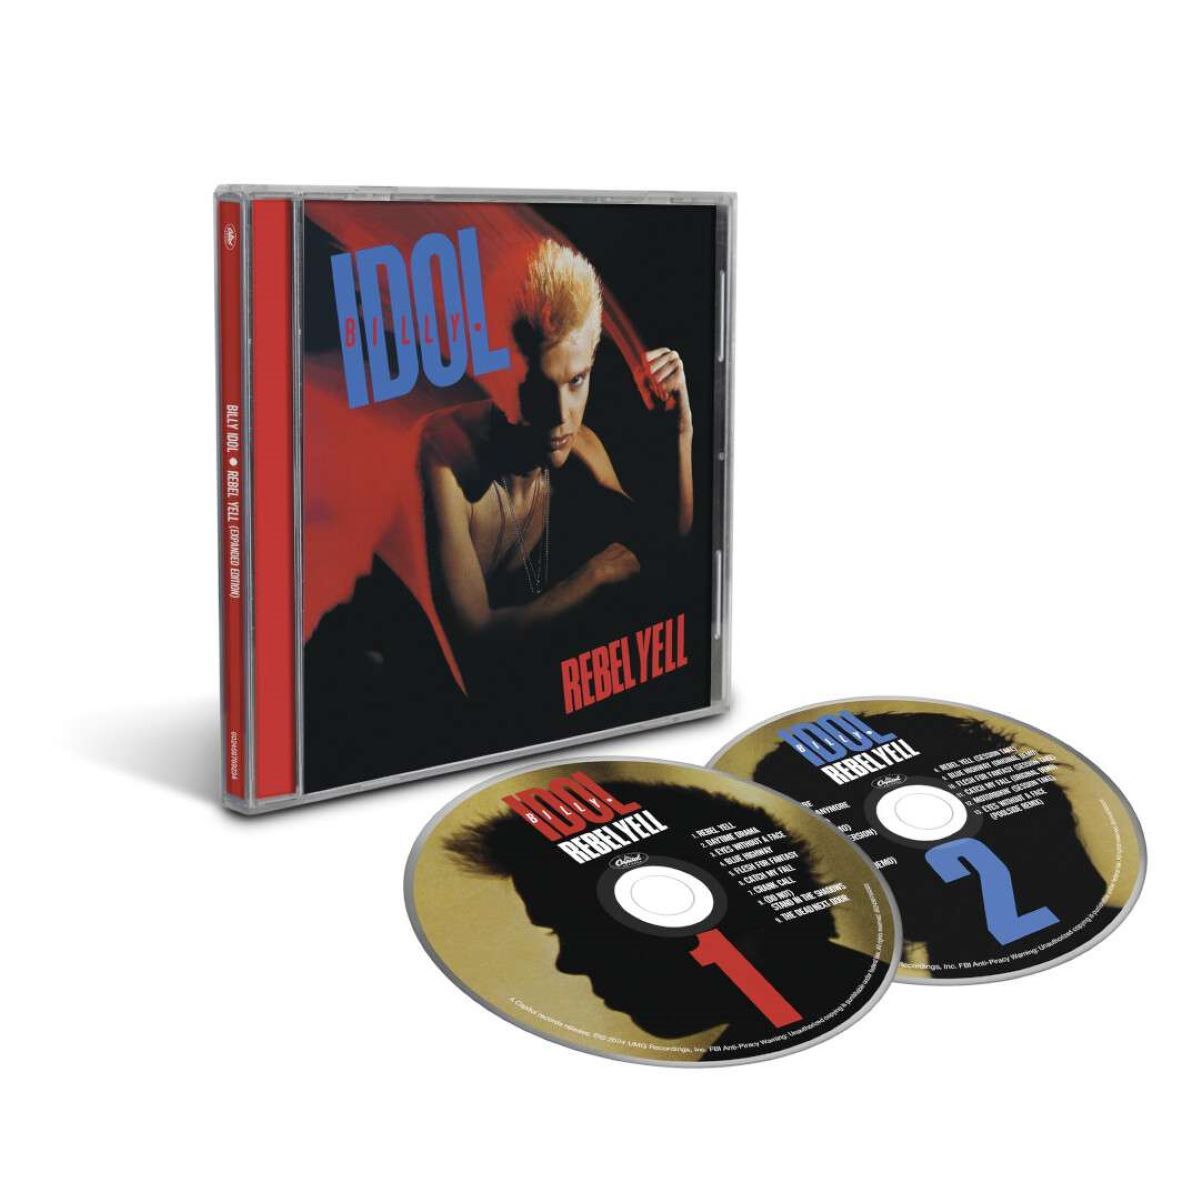 Rebel yell von Billy Idol - 2-CD (Deluxe Edition, Jewelcase, Re-Release)